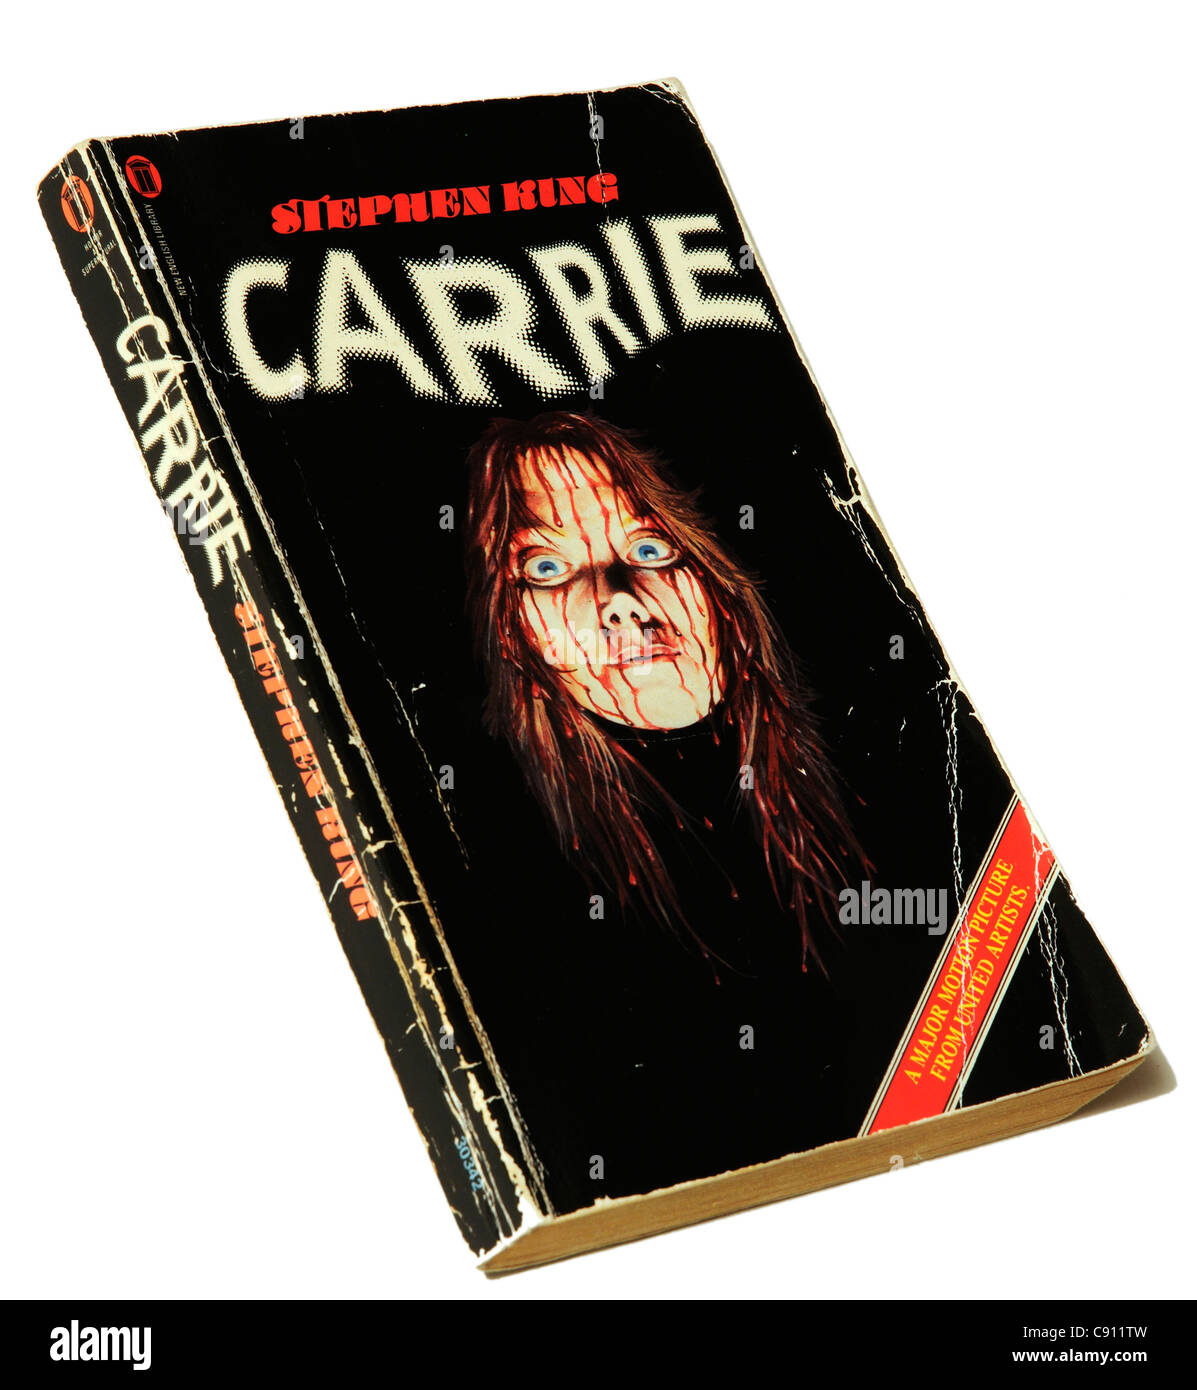 Carrie by Stephen King Stock Photo - Alamy